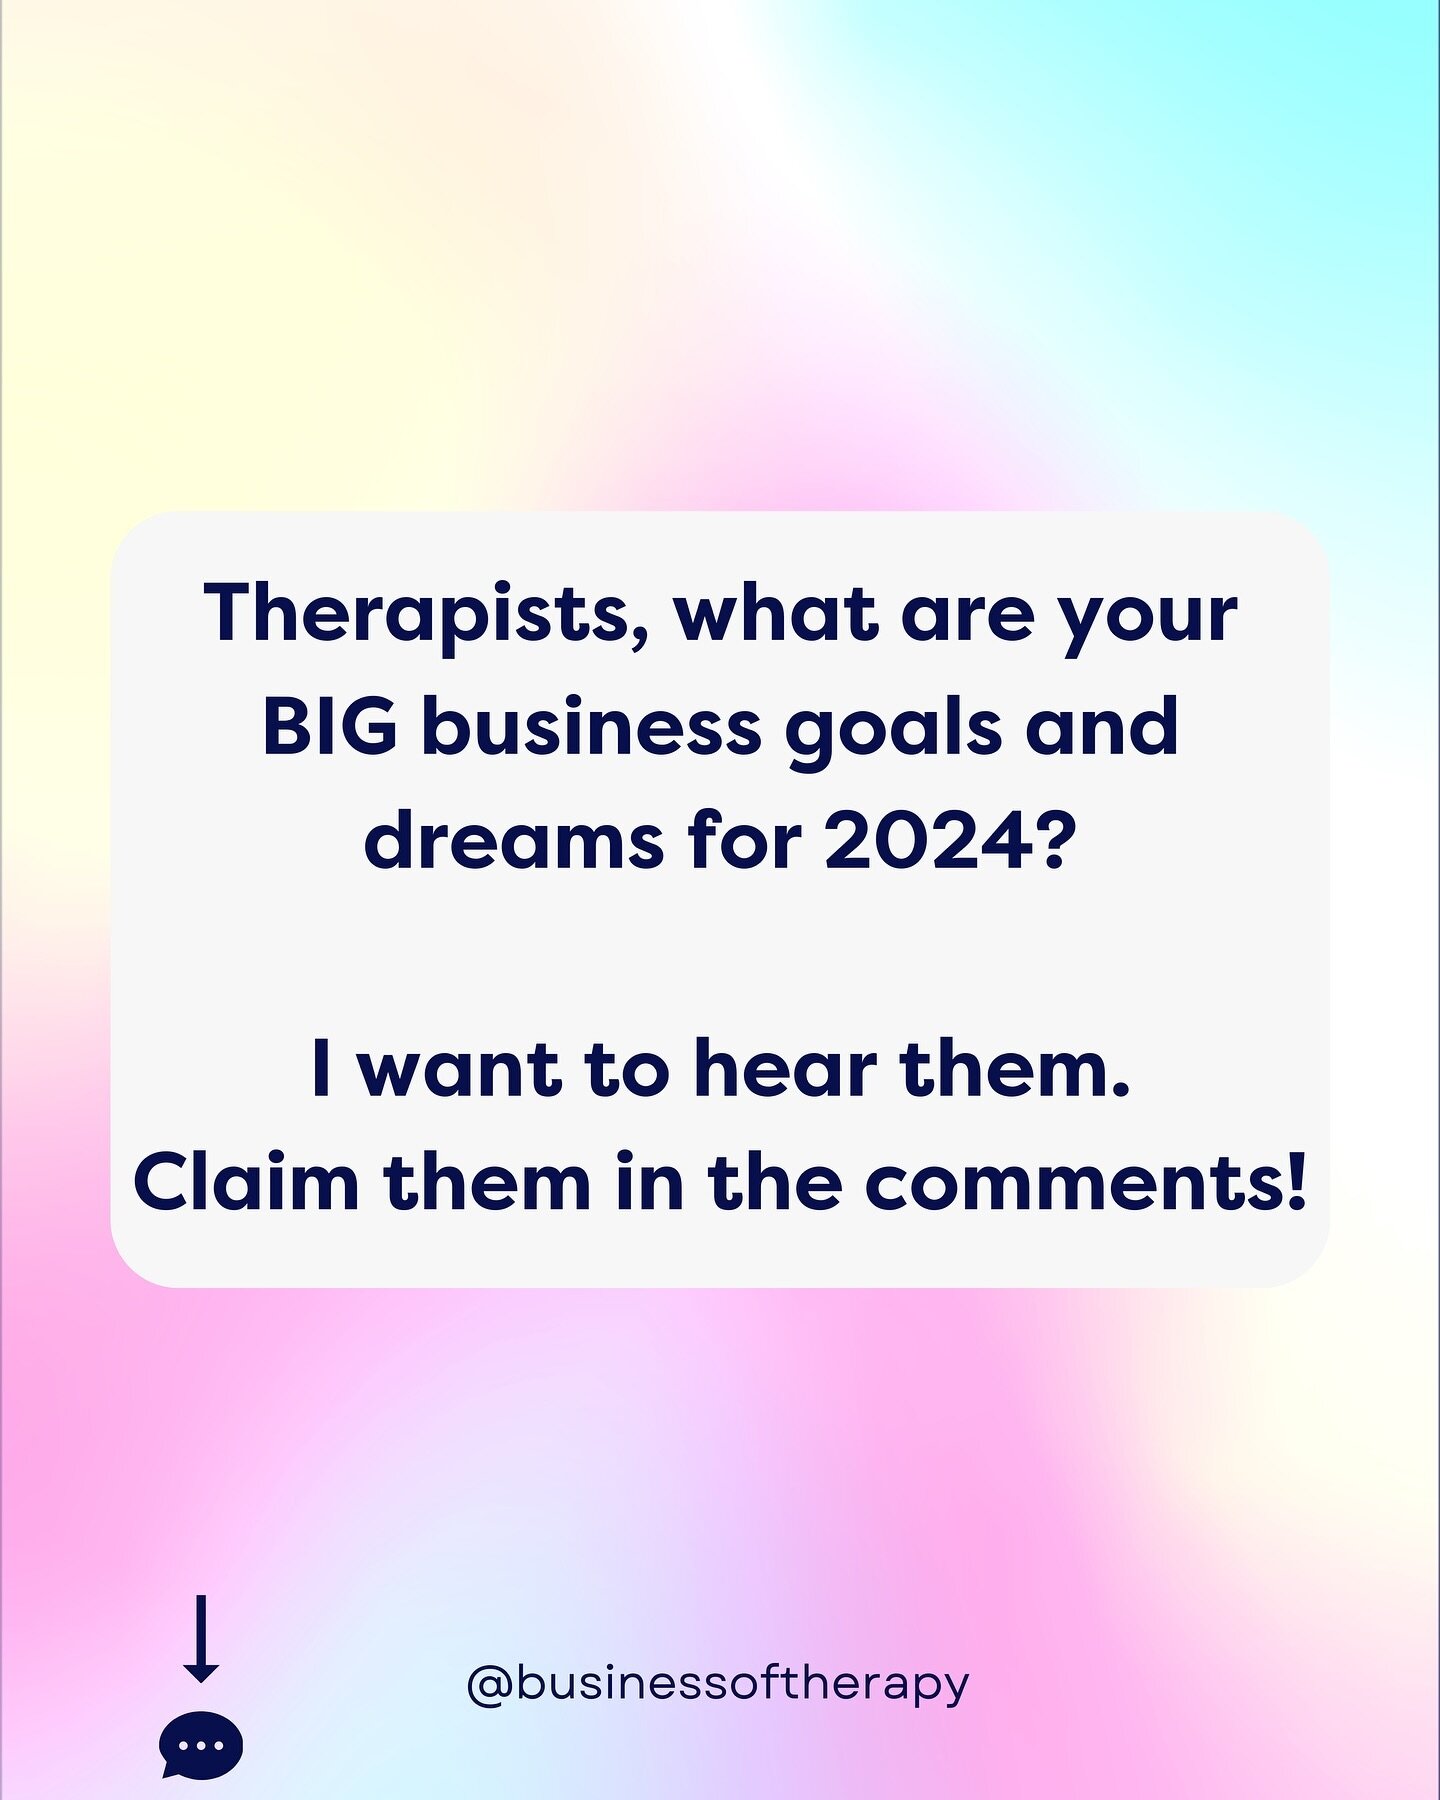 None of your goals are too big around here&hellip;

I want to hear YOUR goals (comment pls 👇🏼). Because here&rsquo;s the thing about business goals&hellip;

It&rsquo;s not the same for everybody! Some therapists want:
👉🏼 more freedom in their cal